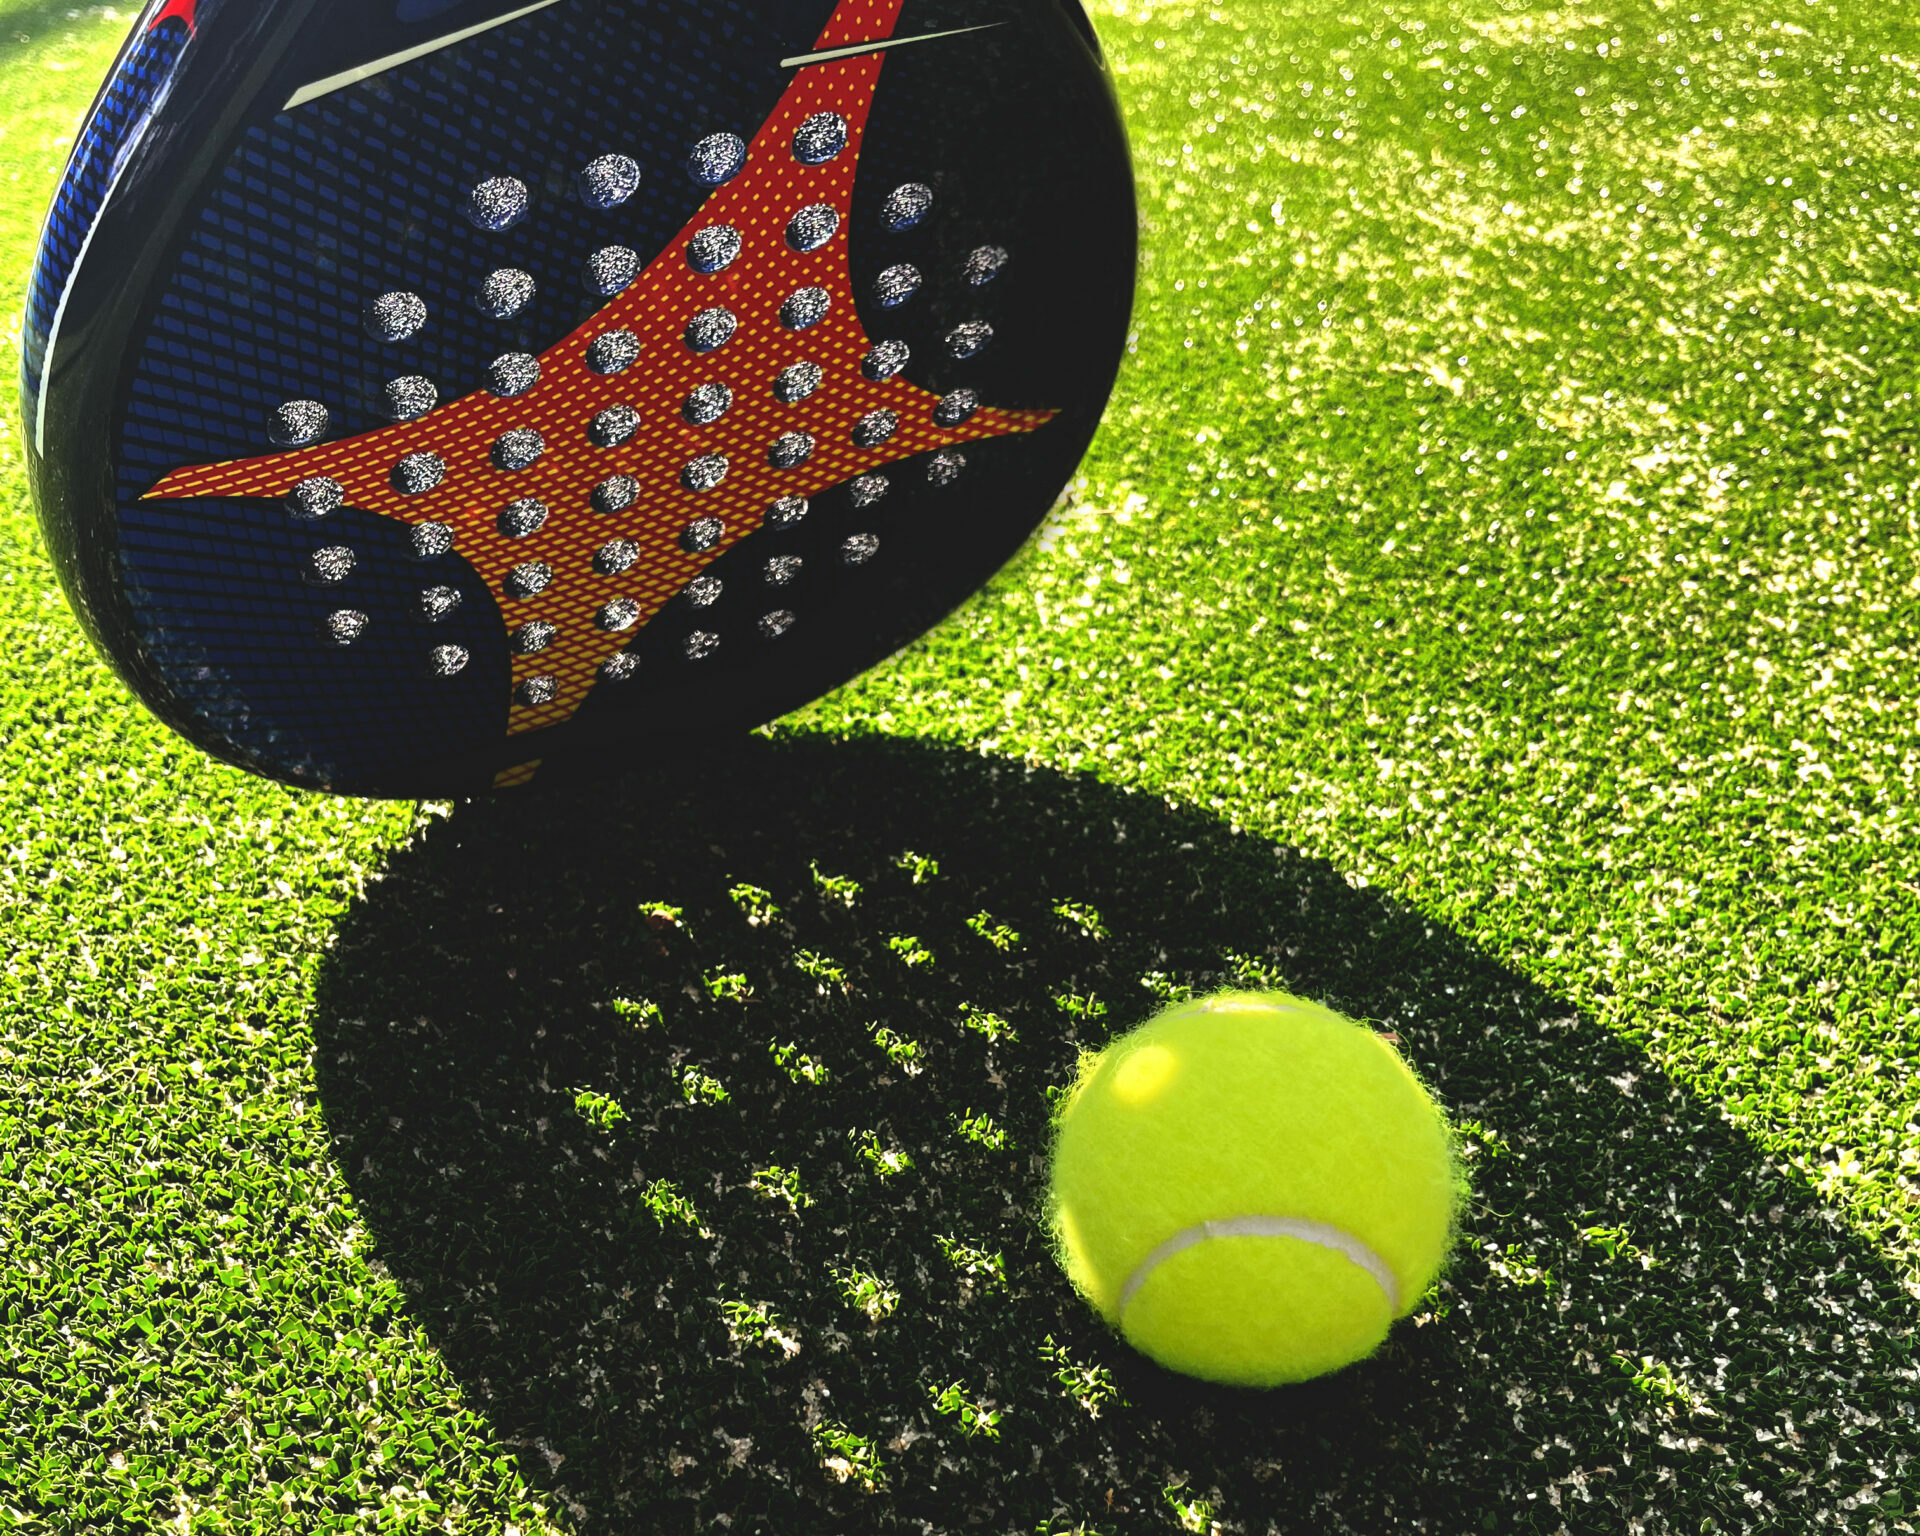 All about: Padel's ball